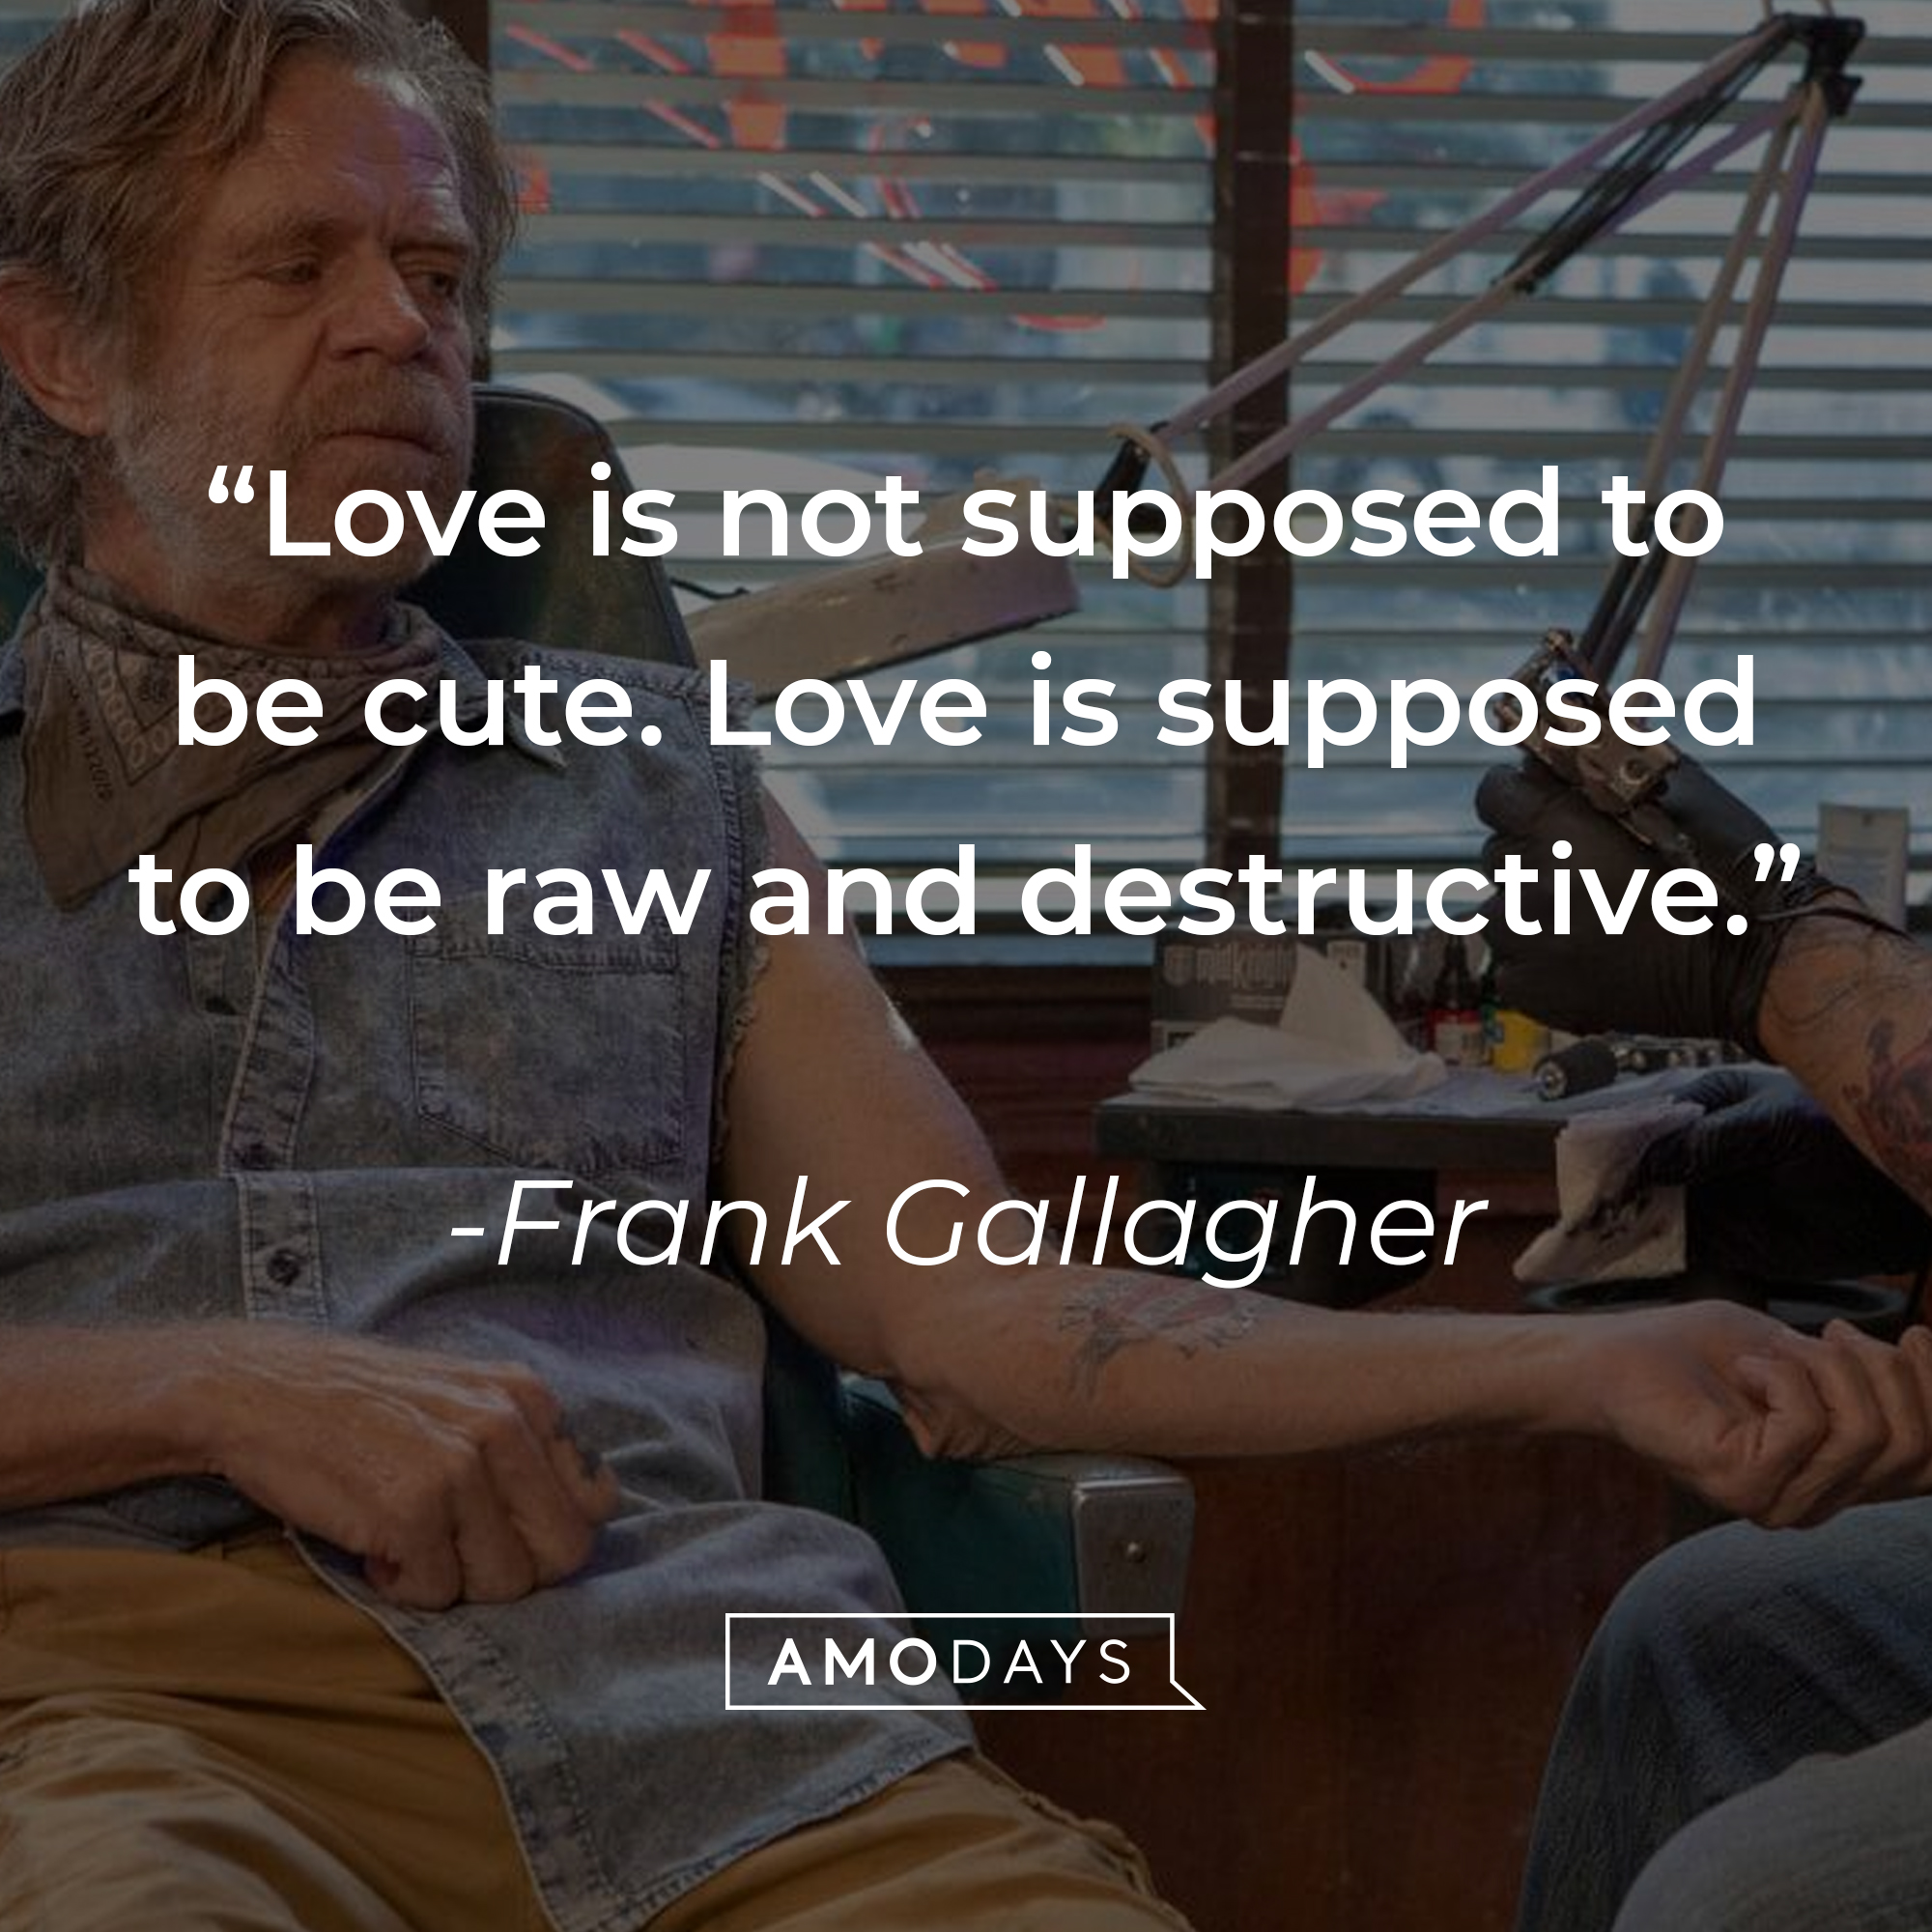 Frank Gallagher's quote: "Love is not supposed to be cute. Love is supposed to be raw and destructive." | Source: facebook.com/ShamelessOnShowtime